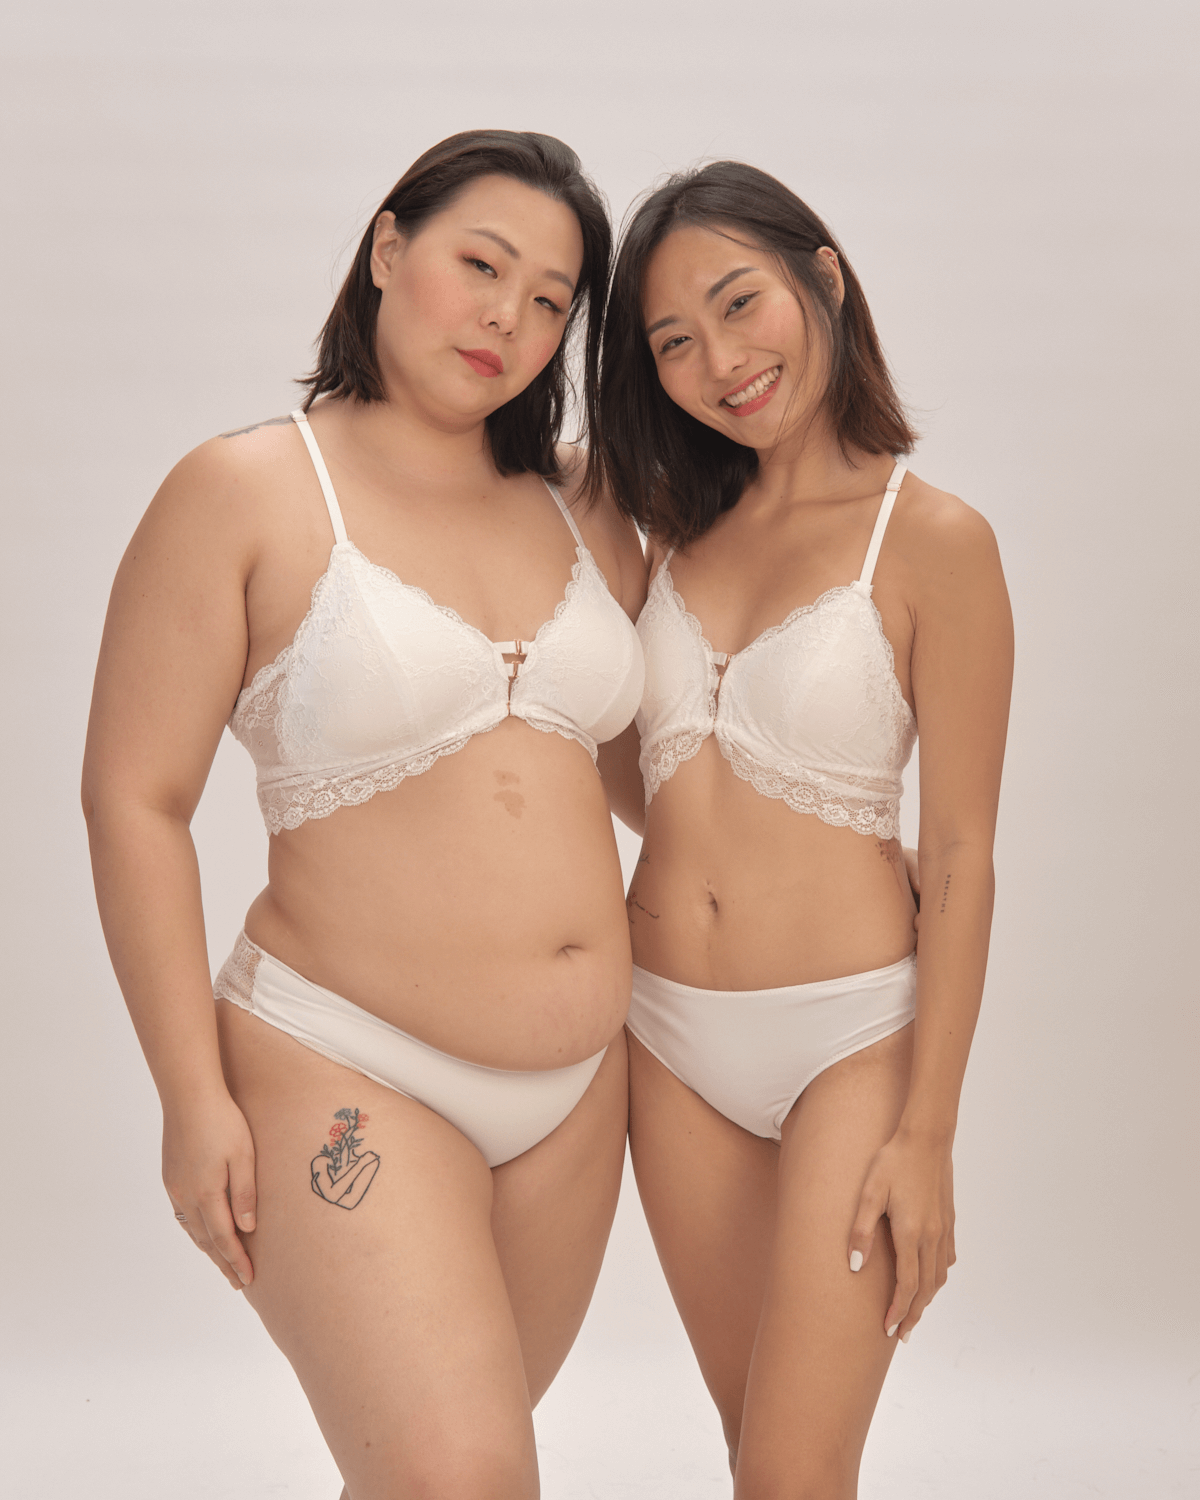 best wishes front close midi bralette in white – Our Bralette Club